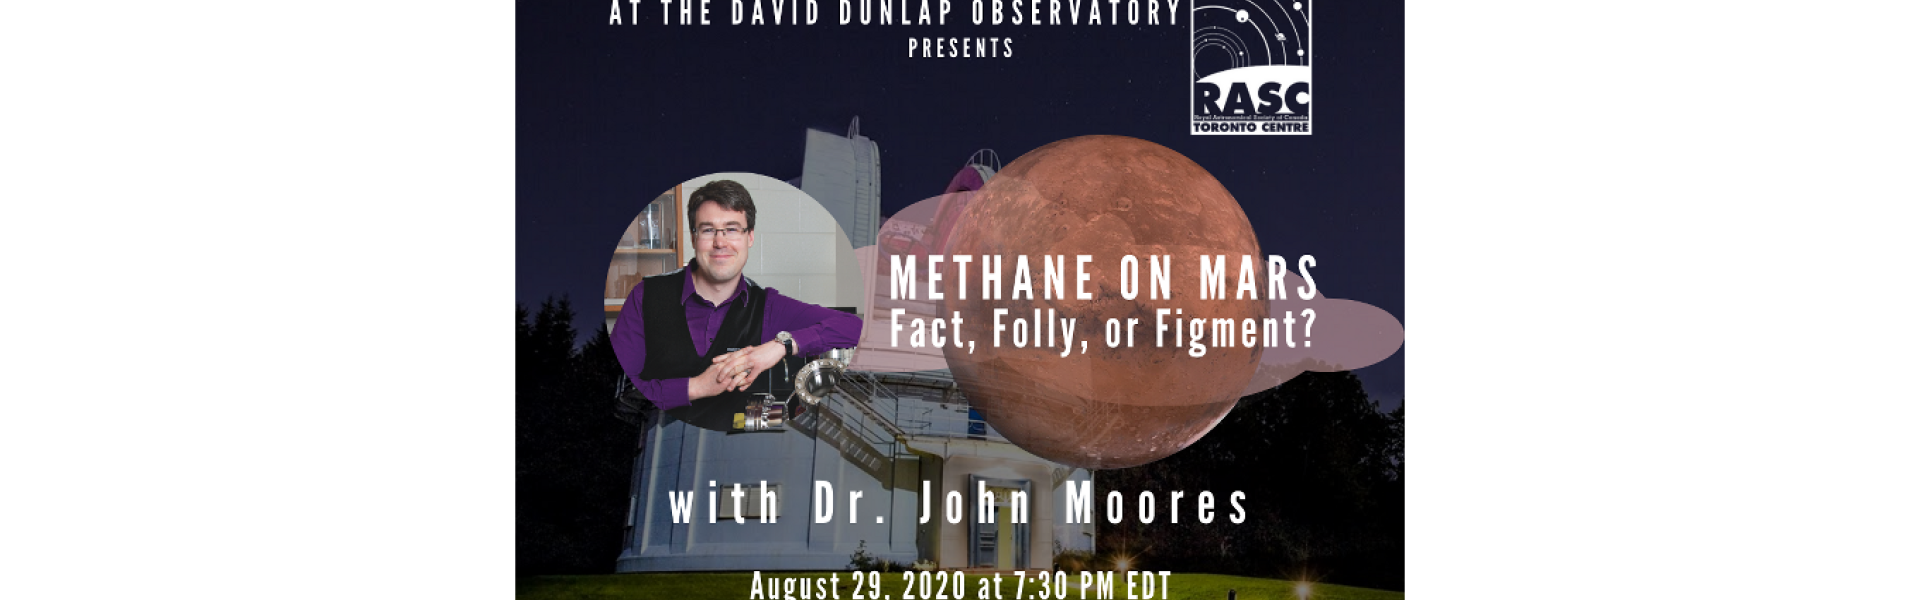 Methane on Mars: Fact, Folly, or Figment? with Dr. John Moores